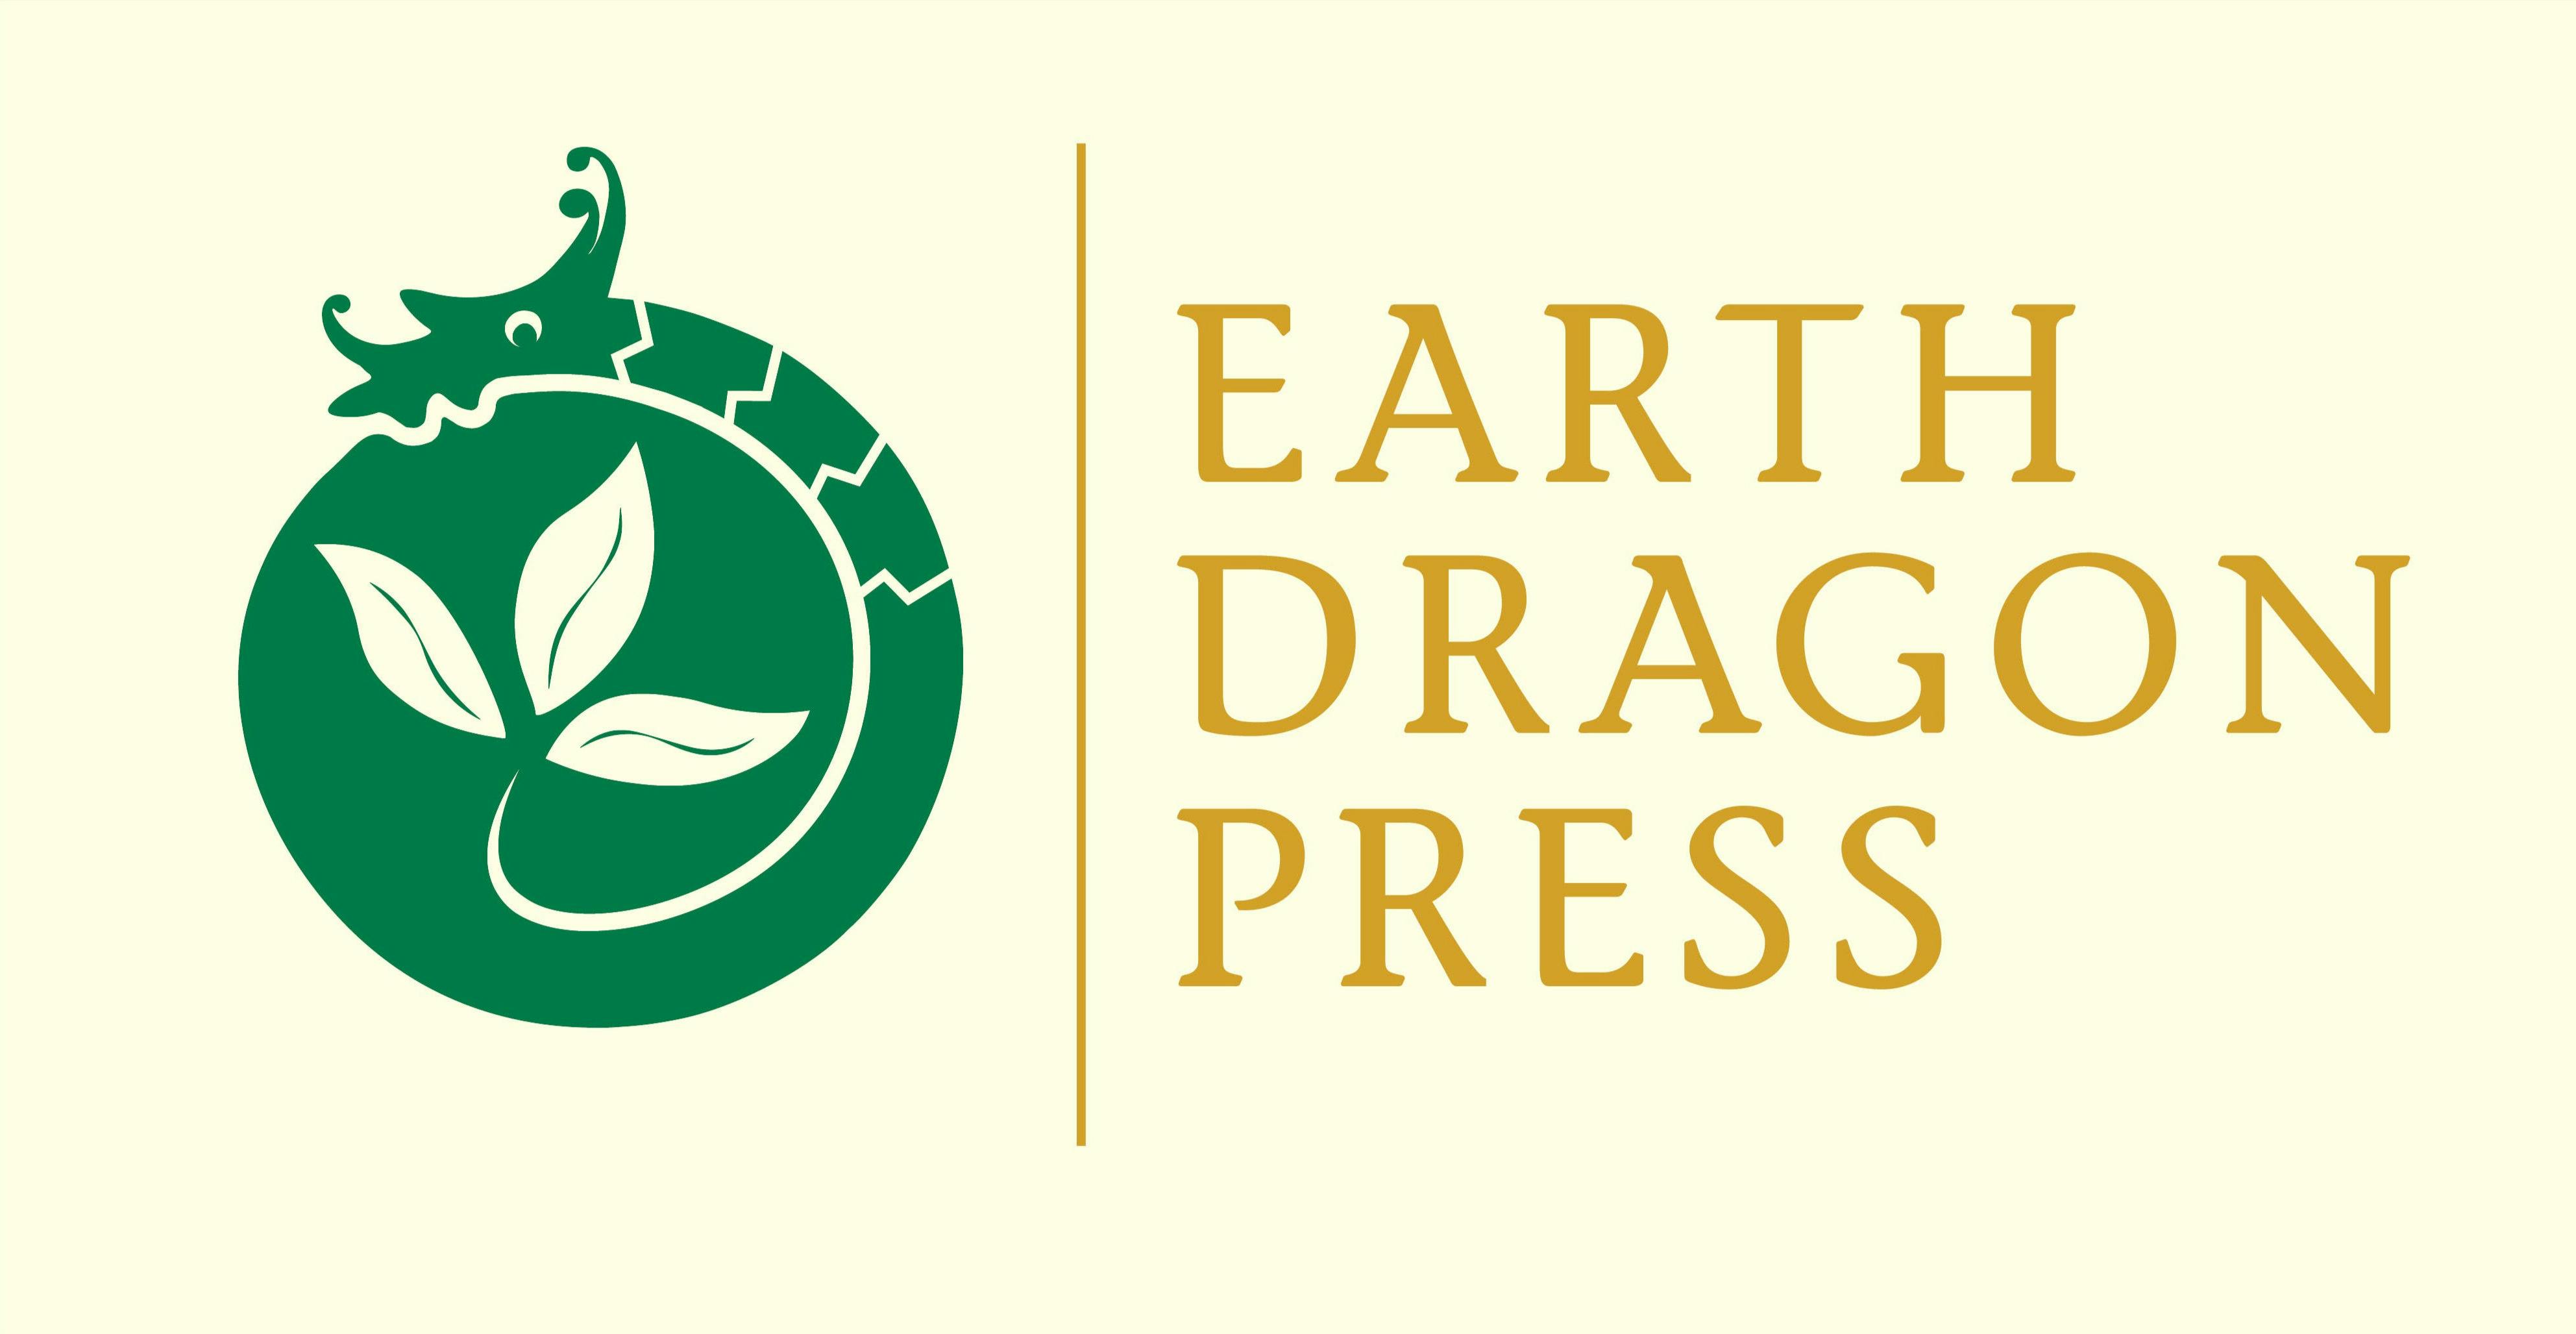 dragon and tree design with Earth Dragon Press publisher logo